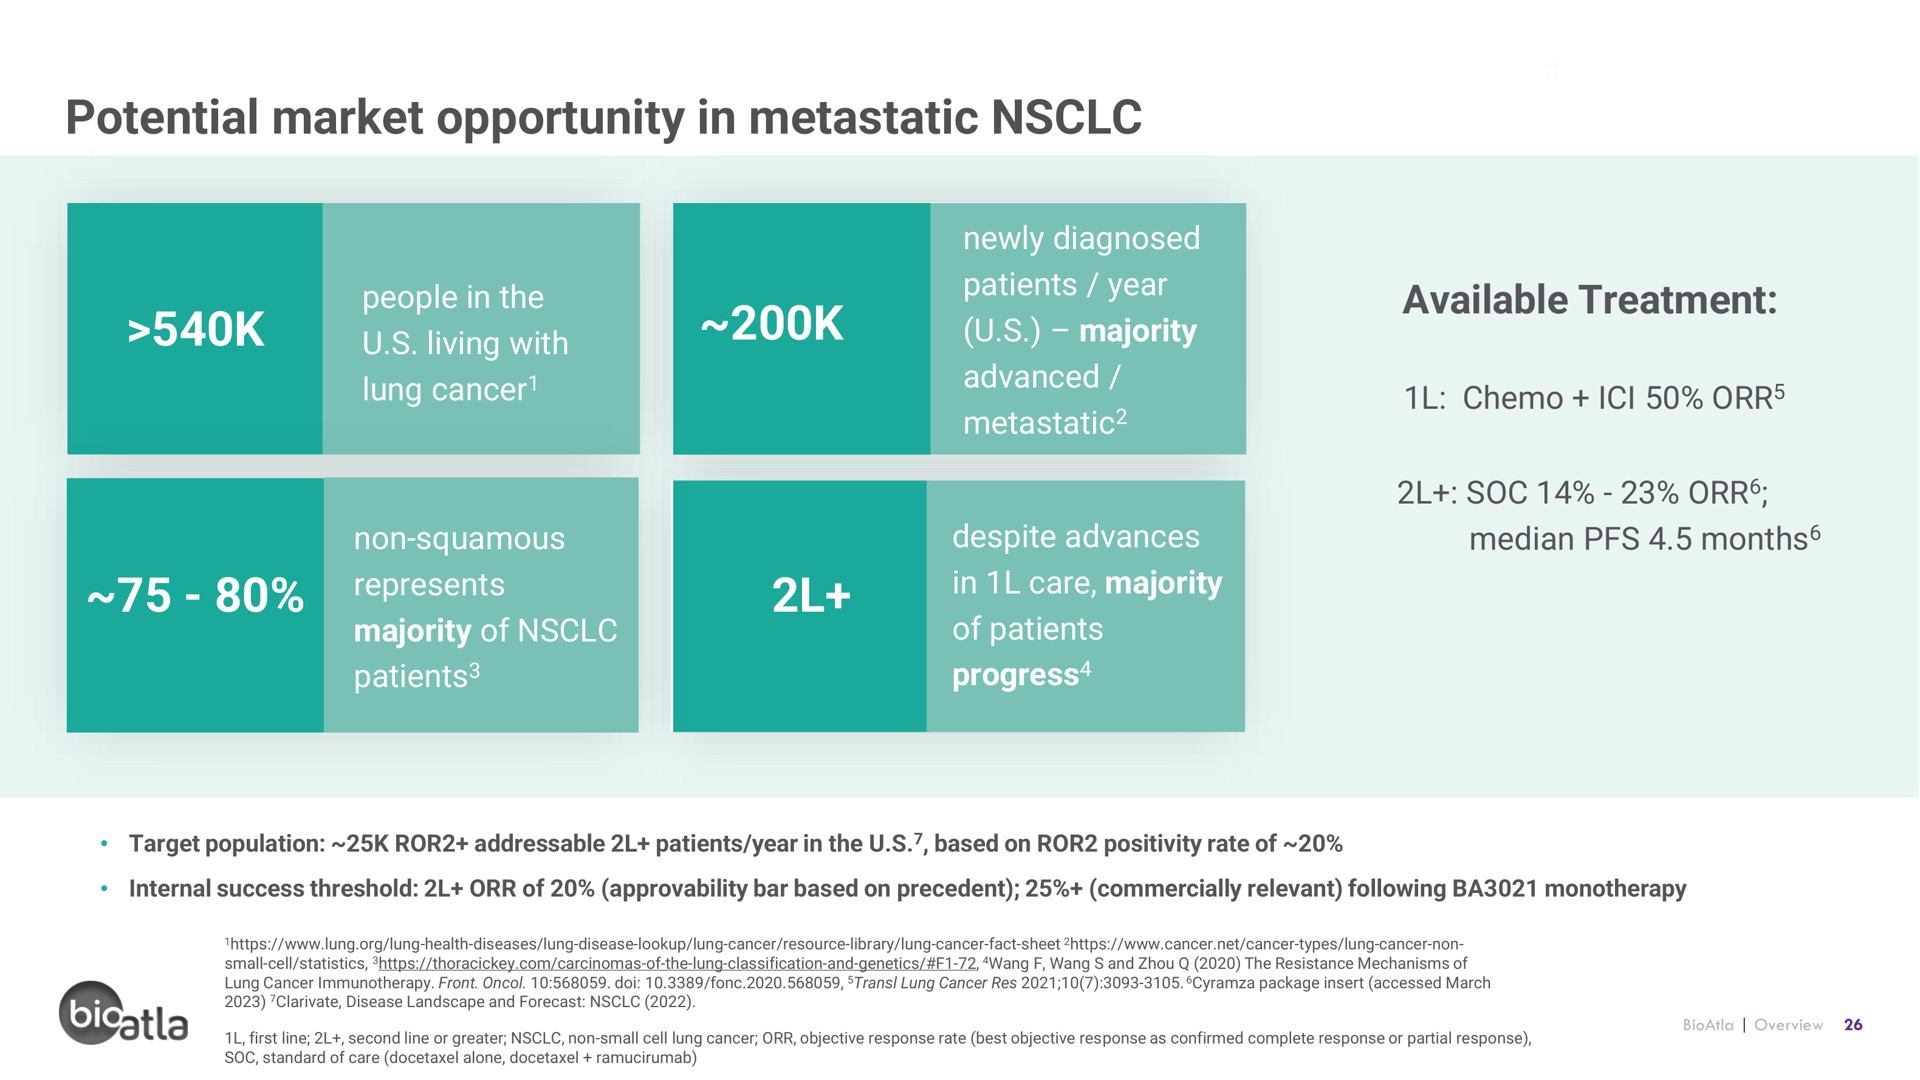 potential market opportunity in metastatic people the ess available treatment | BioAtla